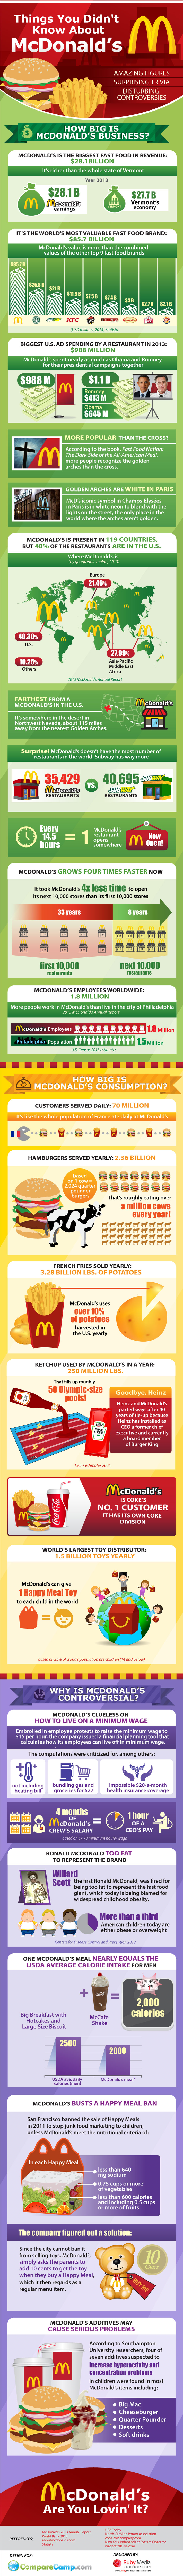 Information About McDonald's That Will Shock You: Fast Food Figures, Facts & Controversies